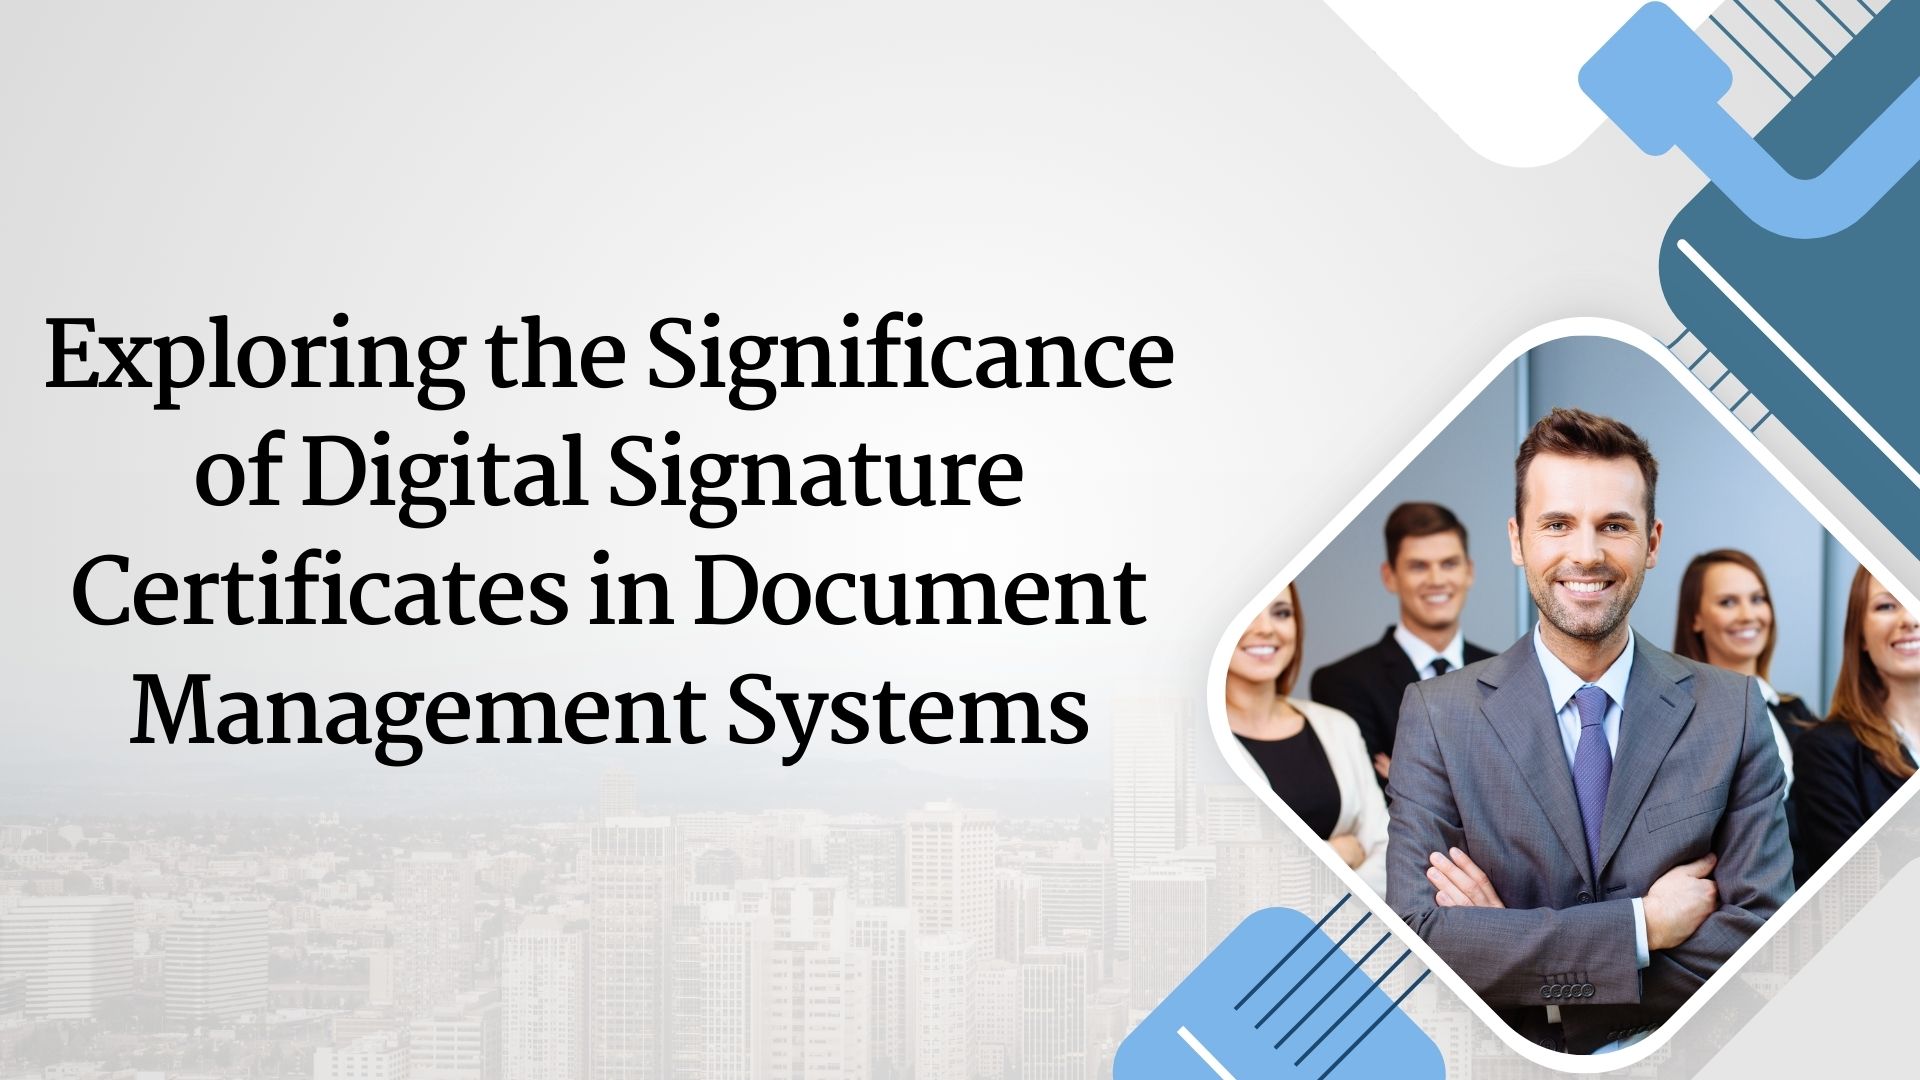 Exploring the Significance of Digital Signature Certificates in Document Management Systems